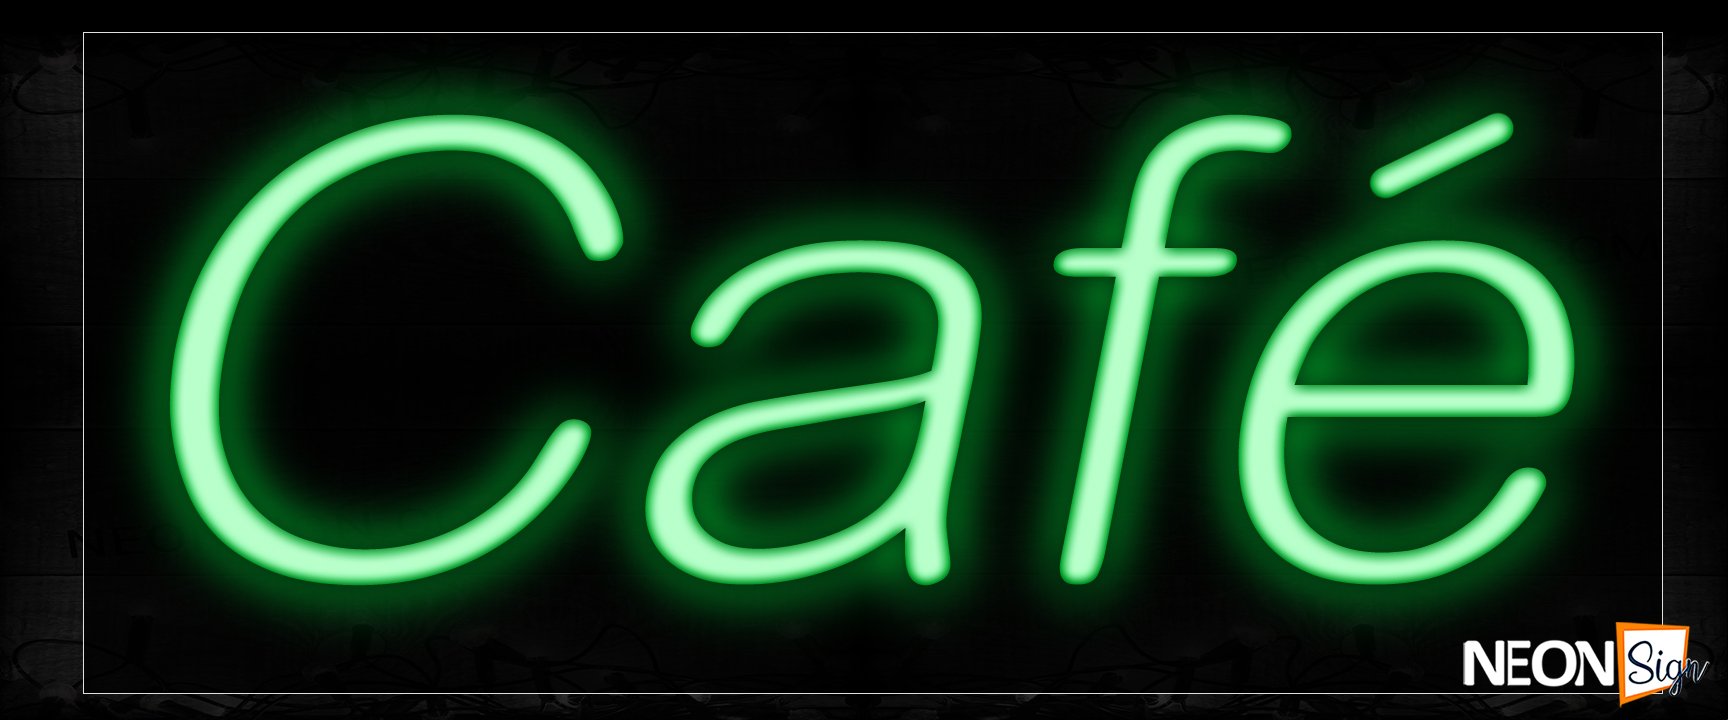 Image of 12030 Cafe In Green Neon Signs_10x24 Black Backing